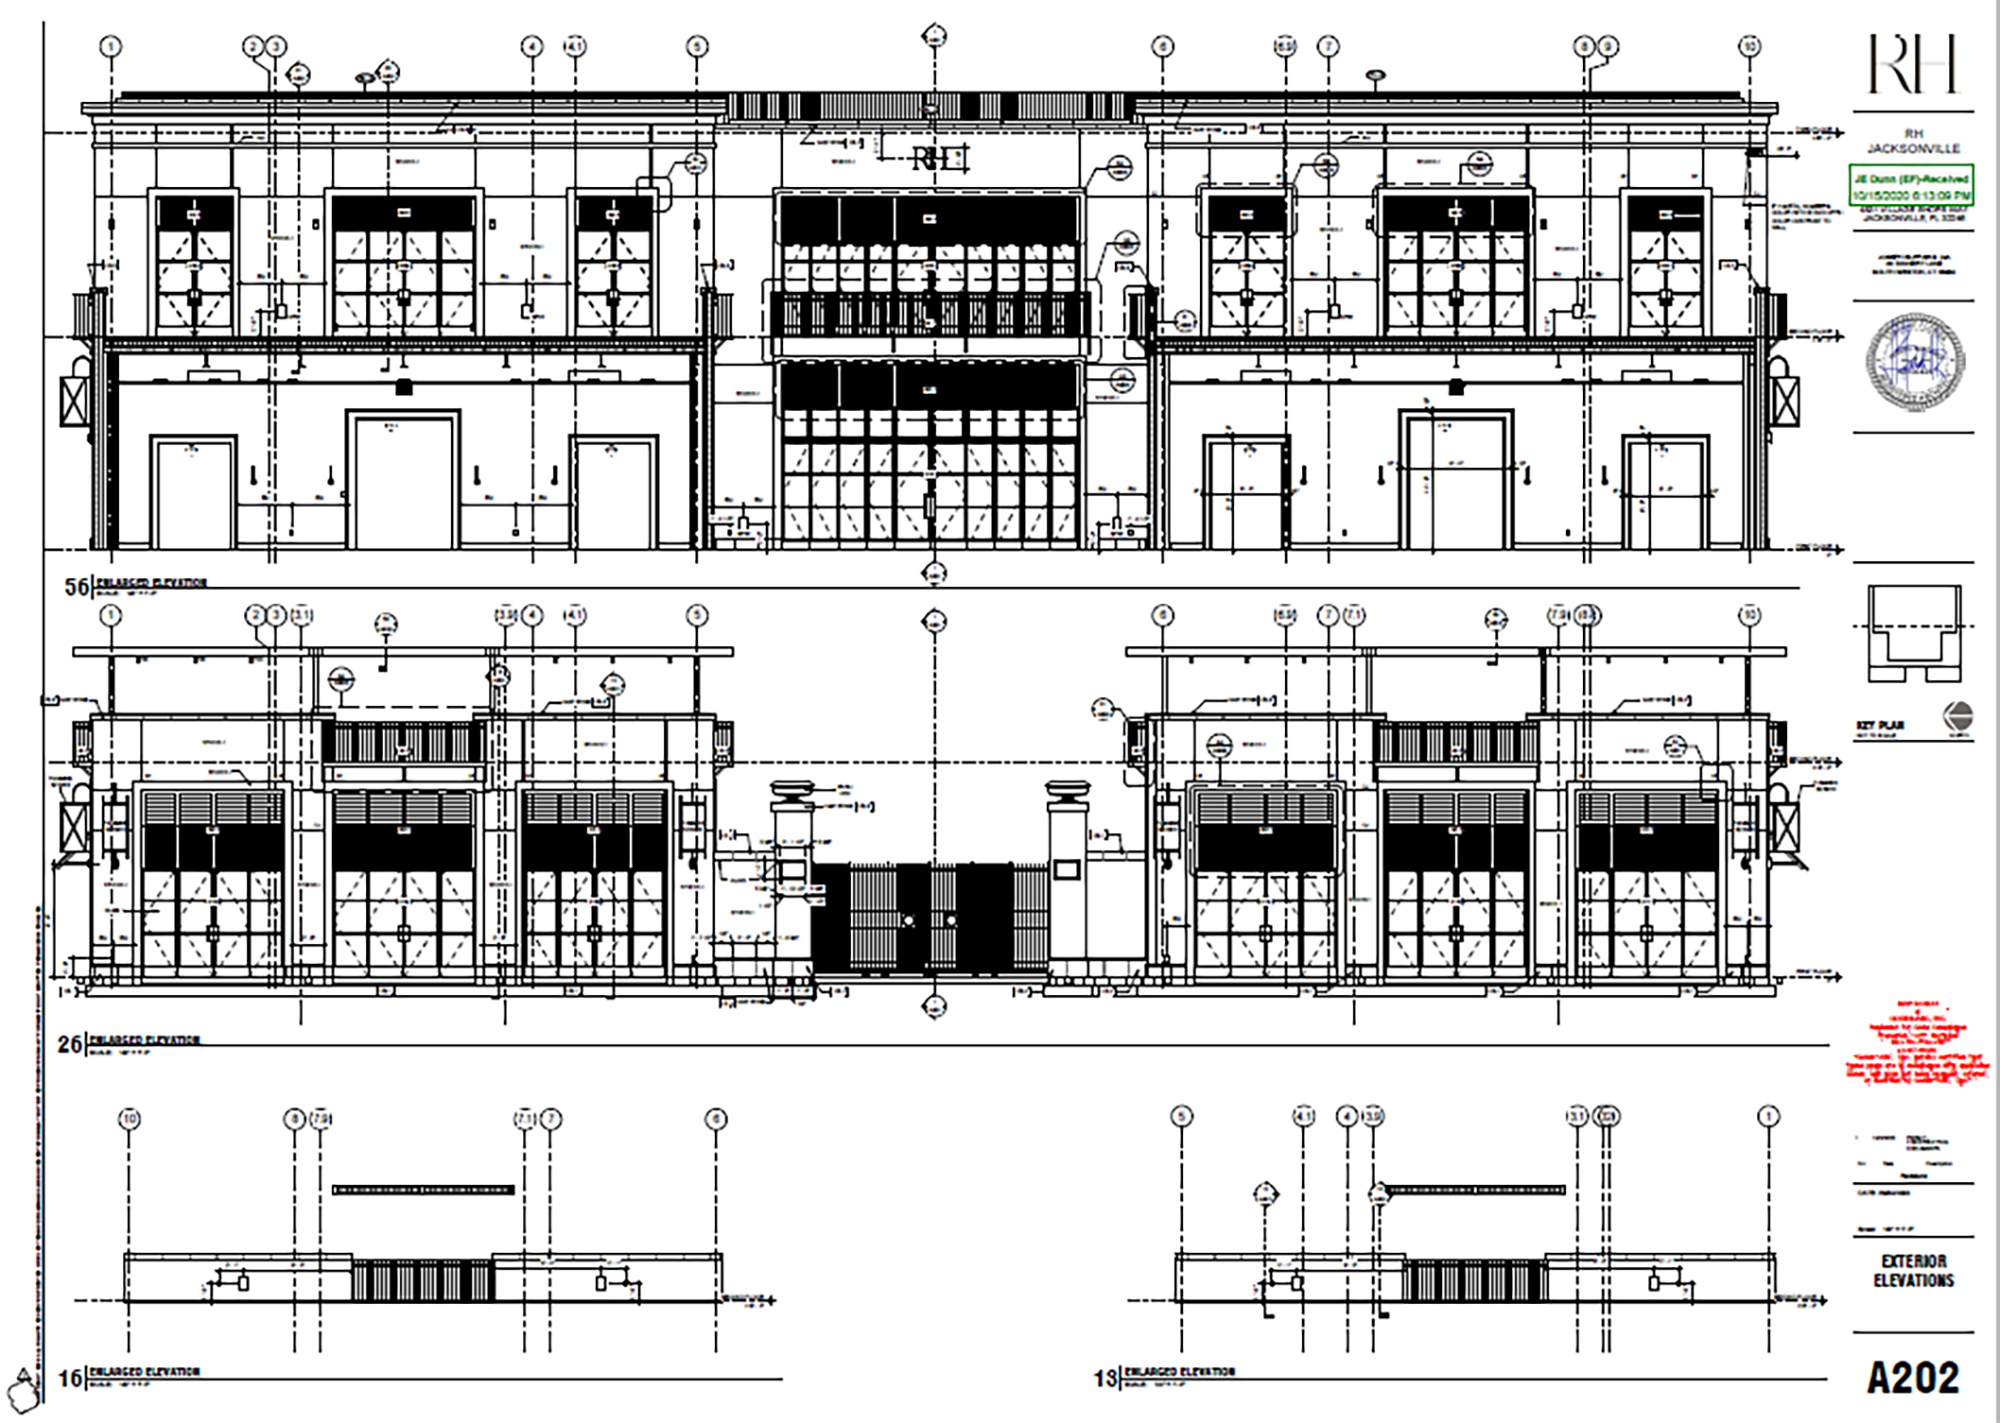 Plans show the front of the RH store.